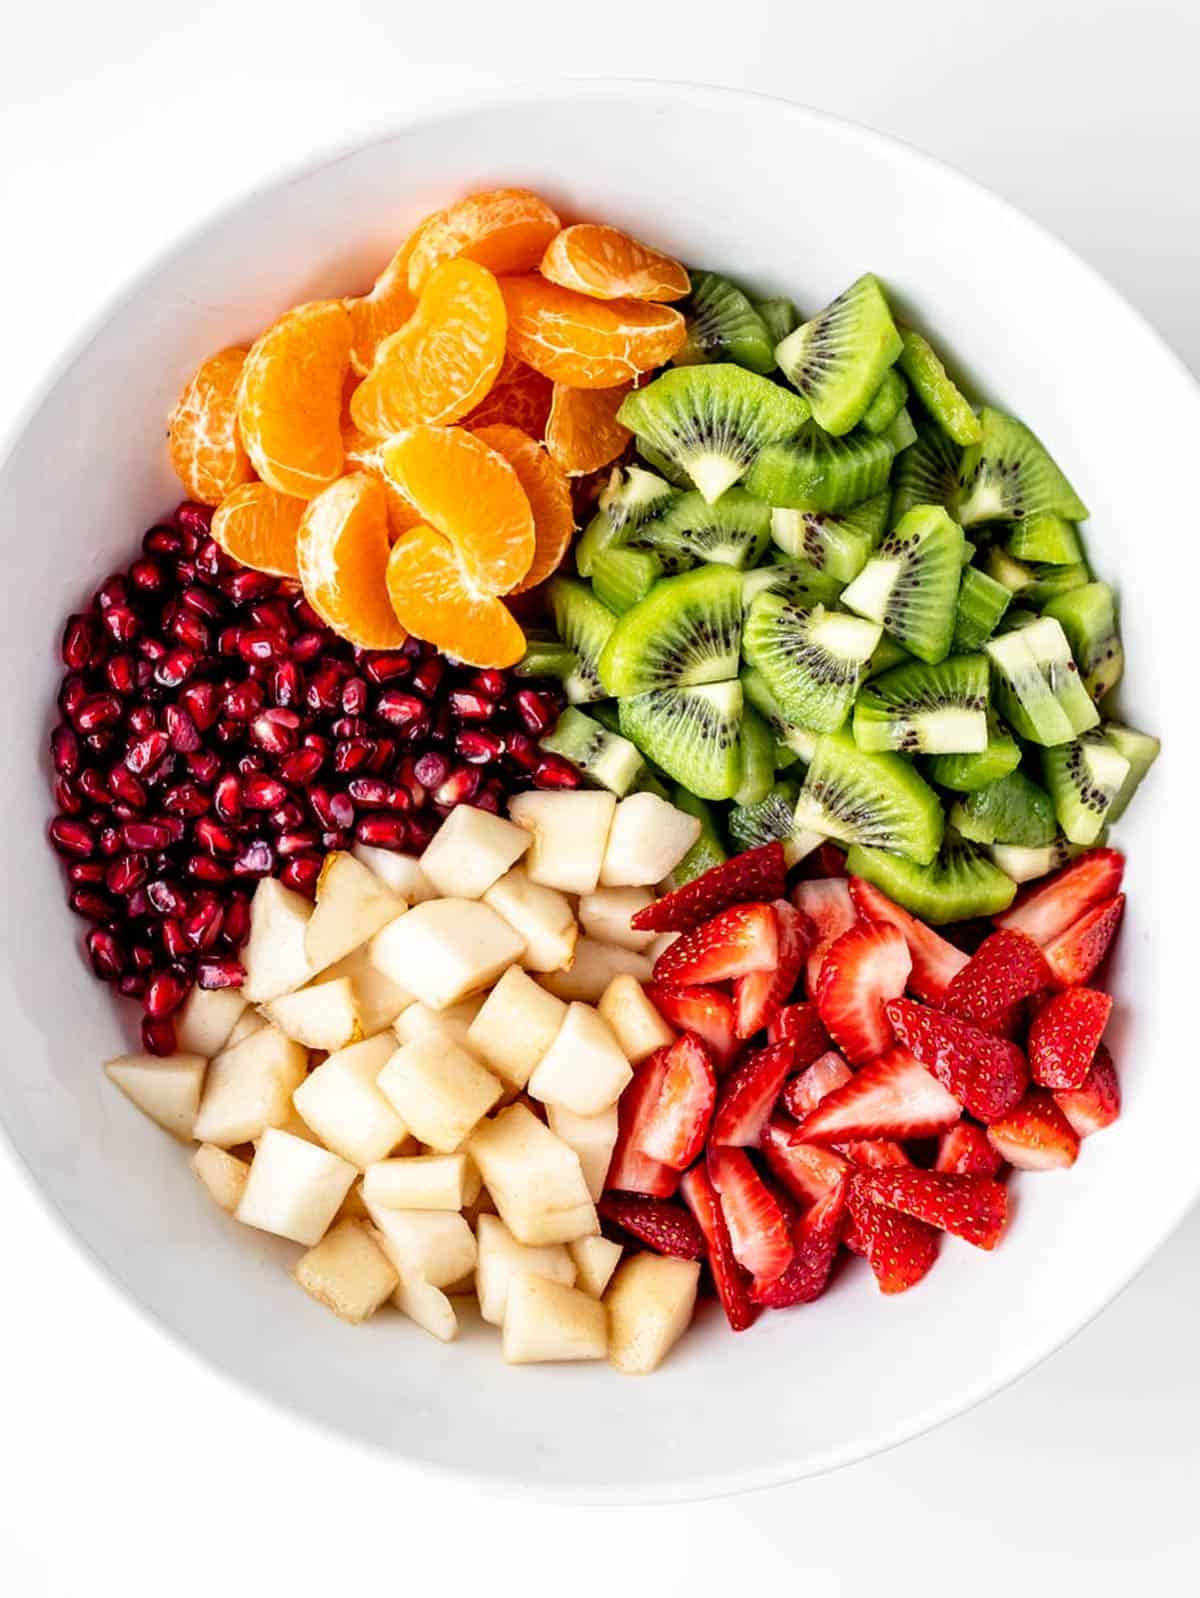 A large serving bowl with the fruit displayed in sections for easy Christmas fruit salad.